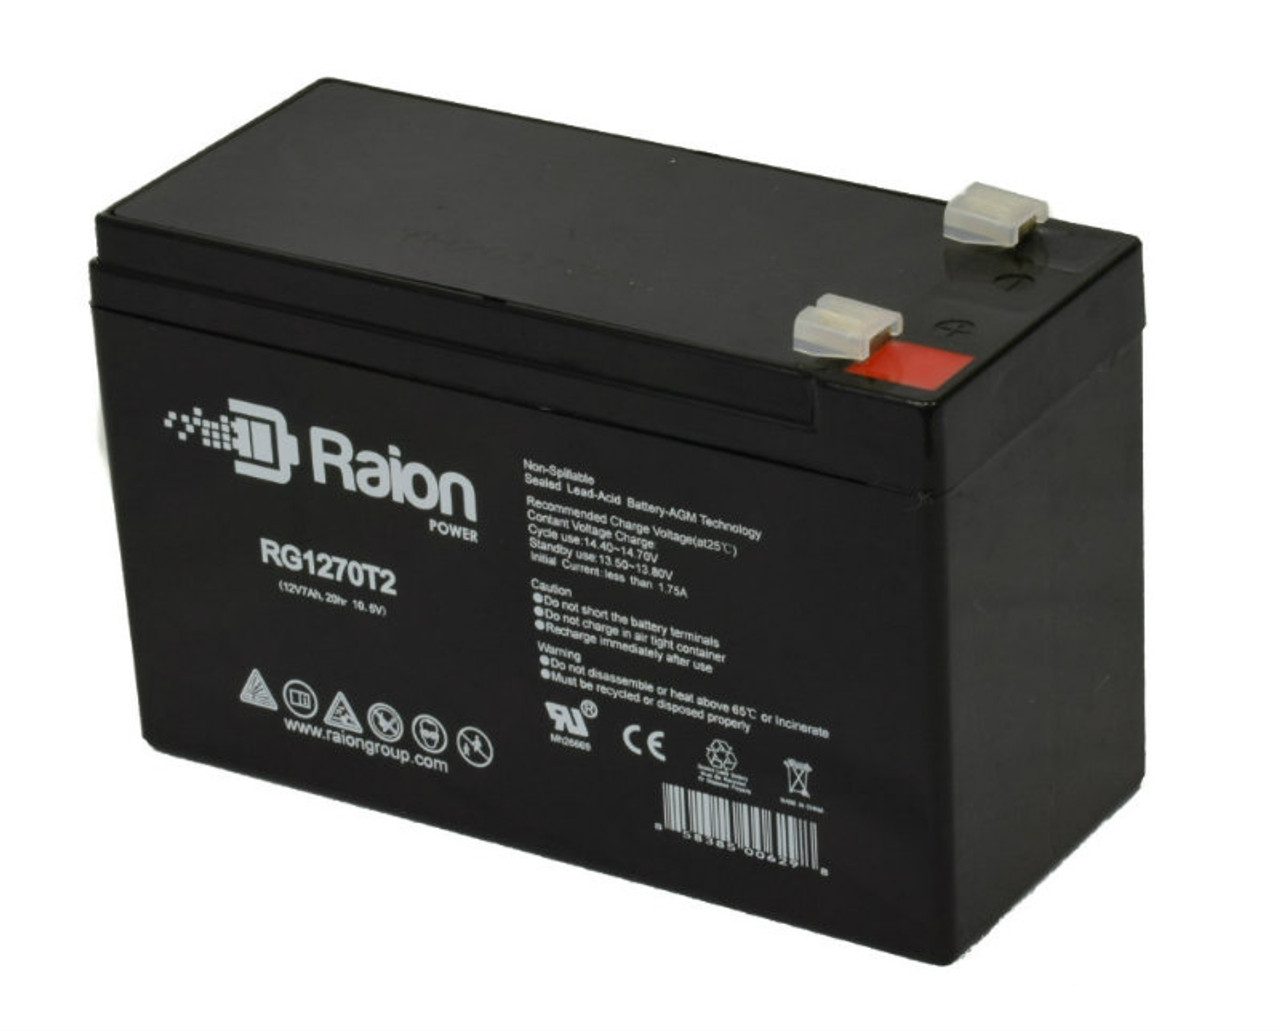 Raion Power RG1270T2 12V 7Ah Rechargeable Battery for Q-Batteries 12LS-7.2